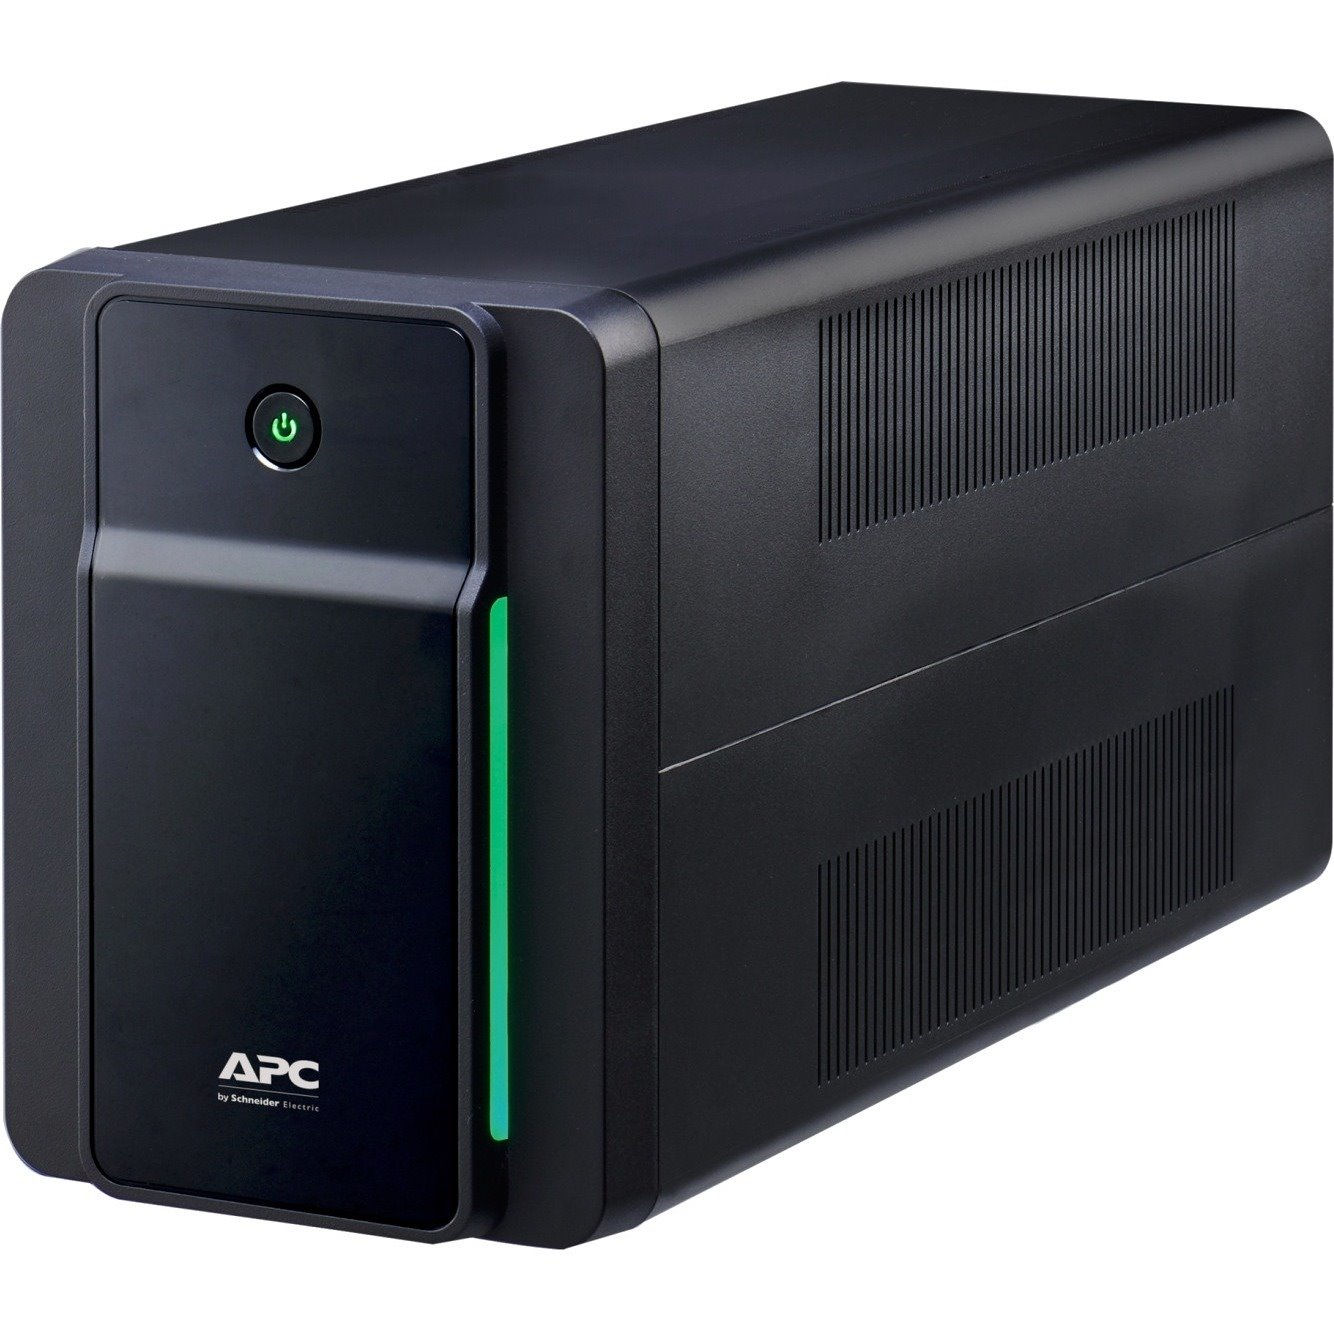 APC by Schneider Electric Back-UPS Line-interactive UPS - 1.20 kVA/650 W